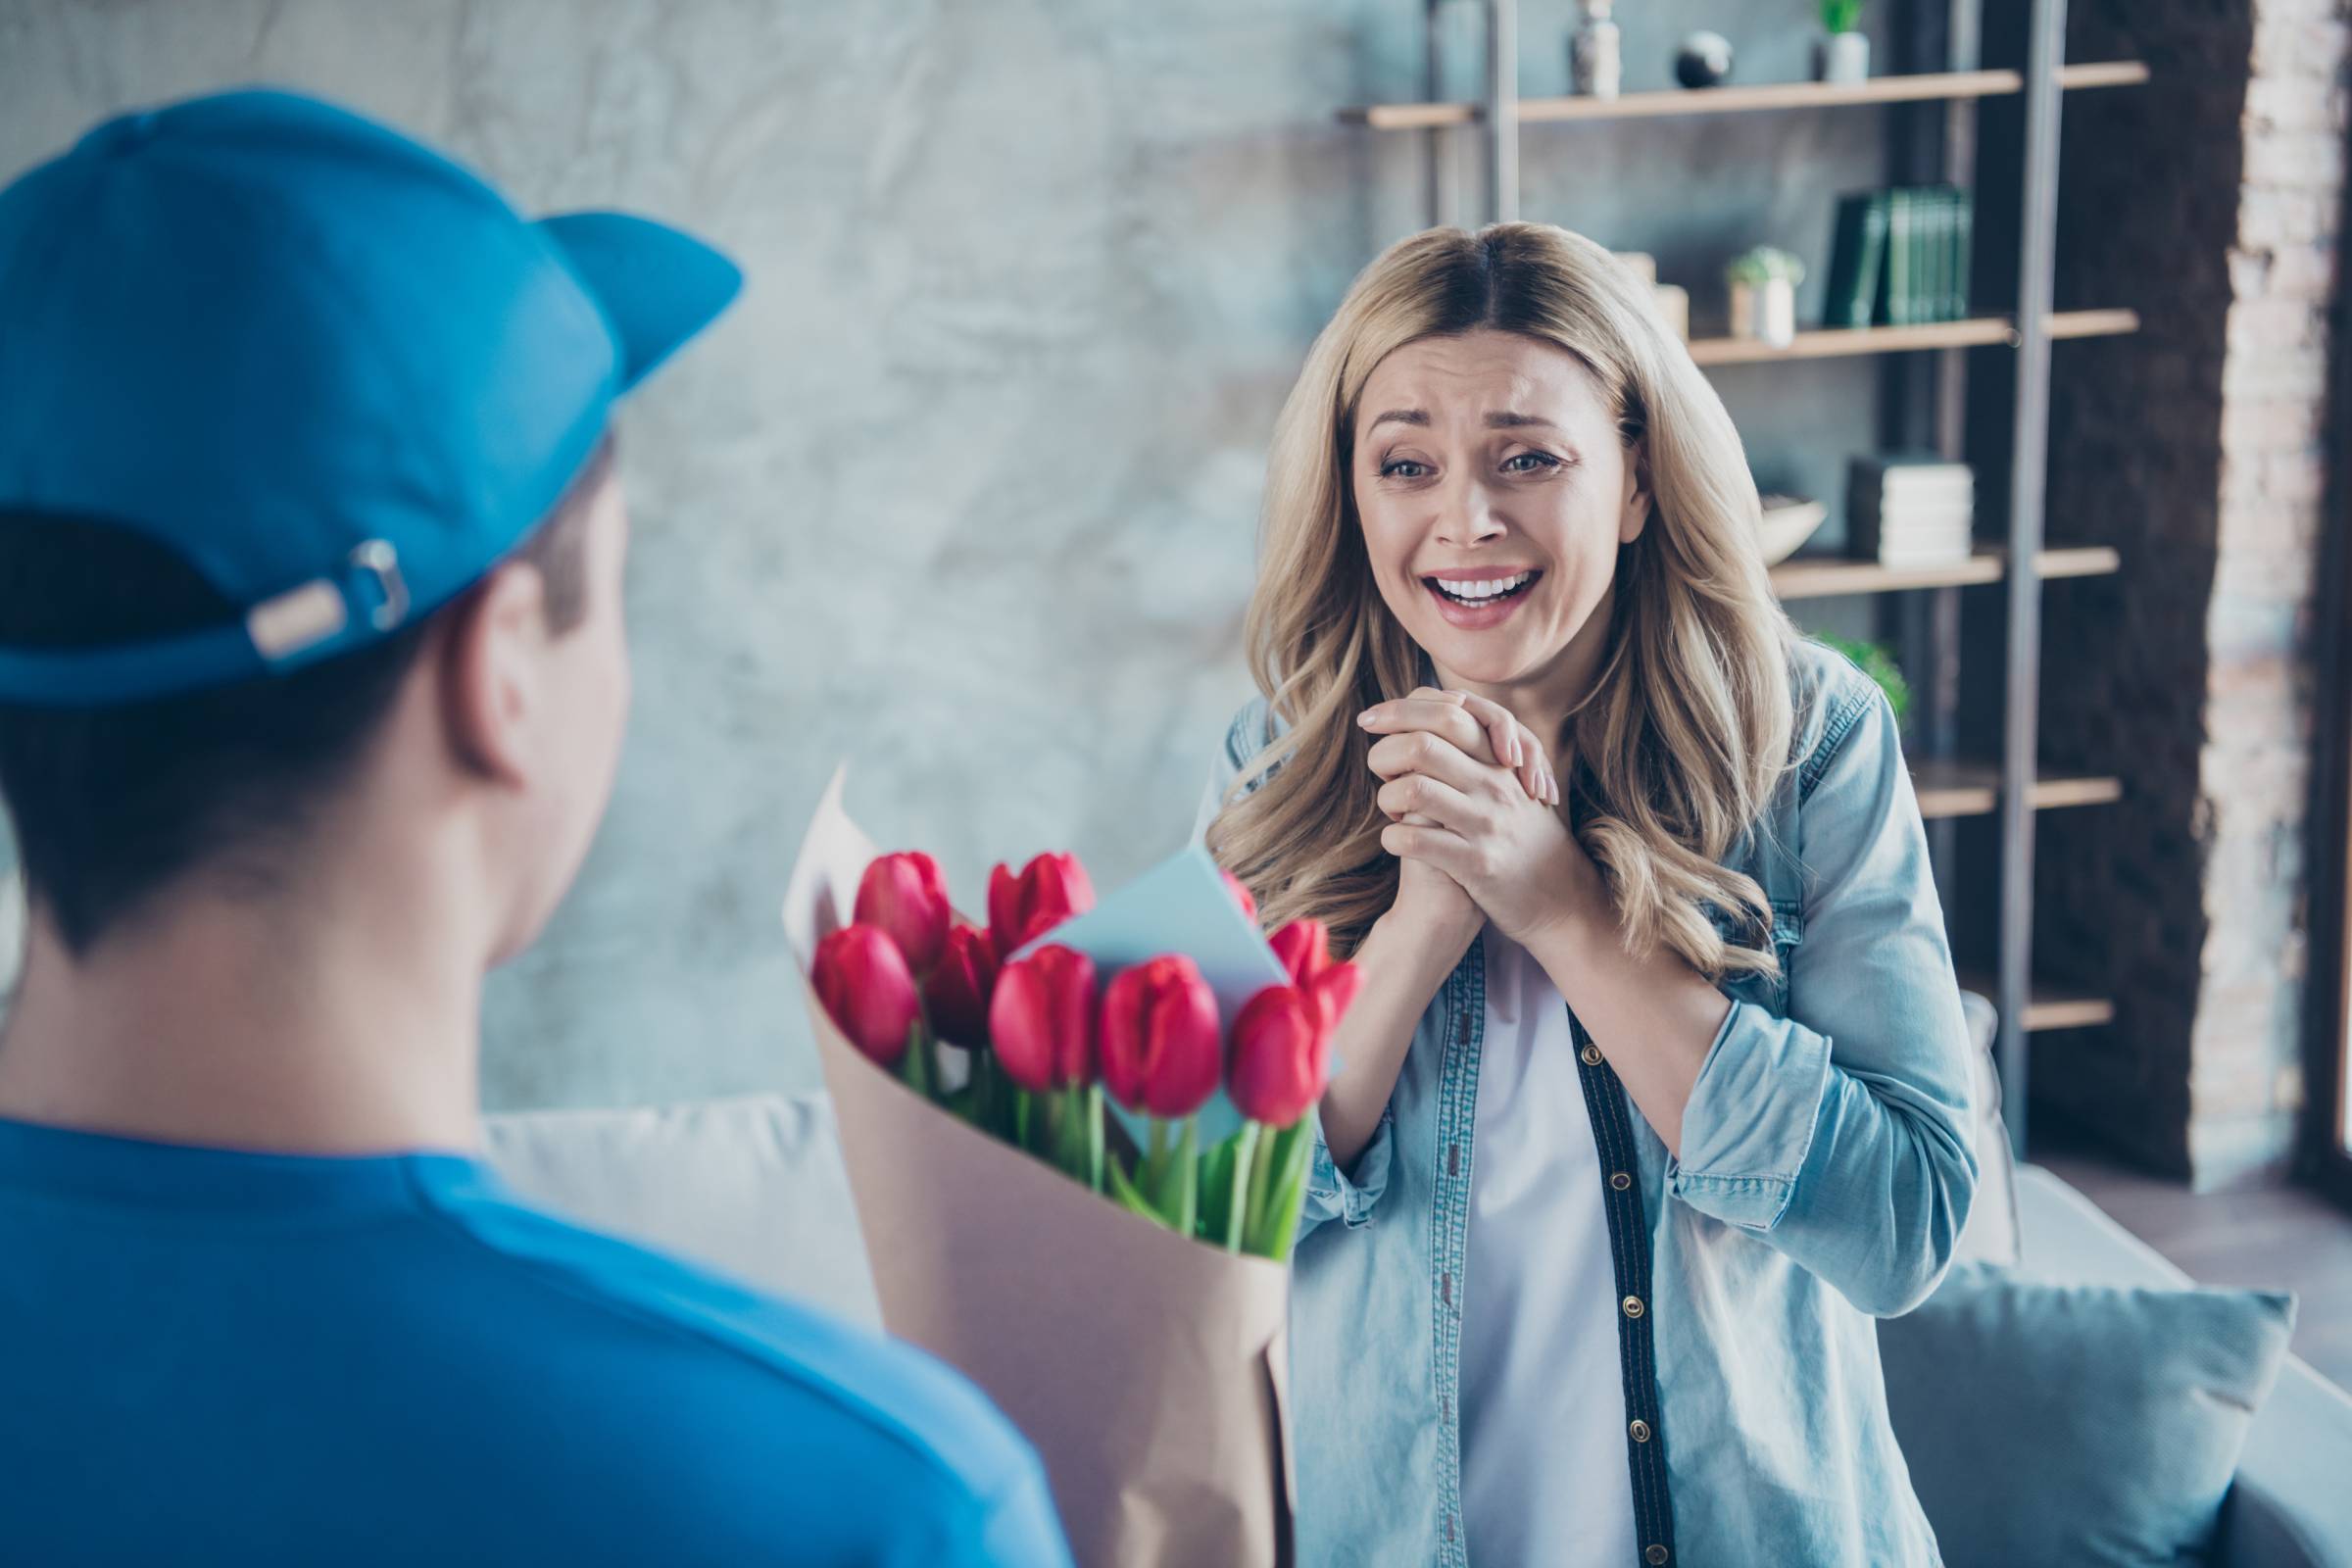 A woman joyfully receiving a bouquet of flowers from a delivery man in a blue shirt